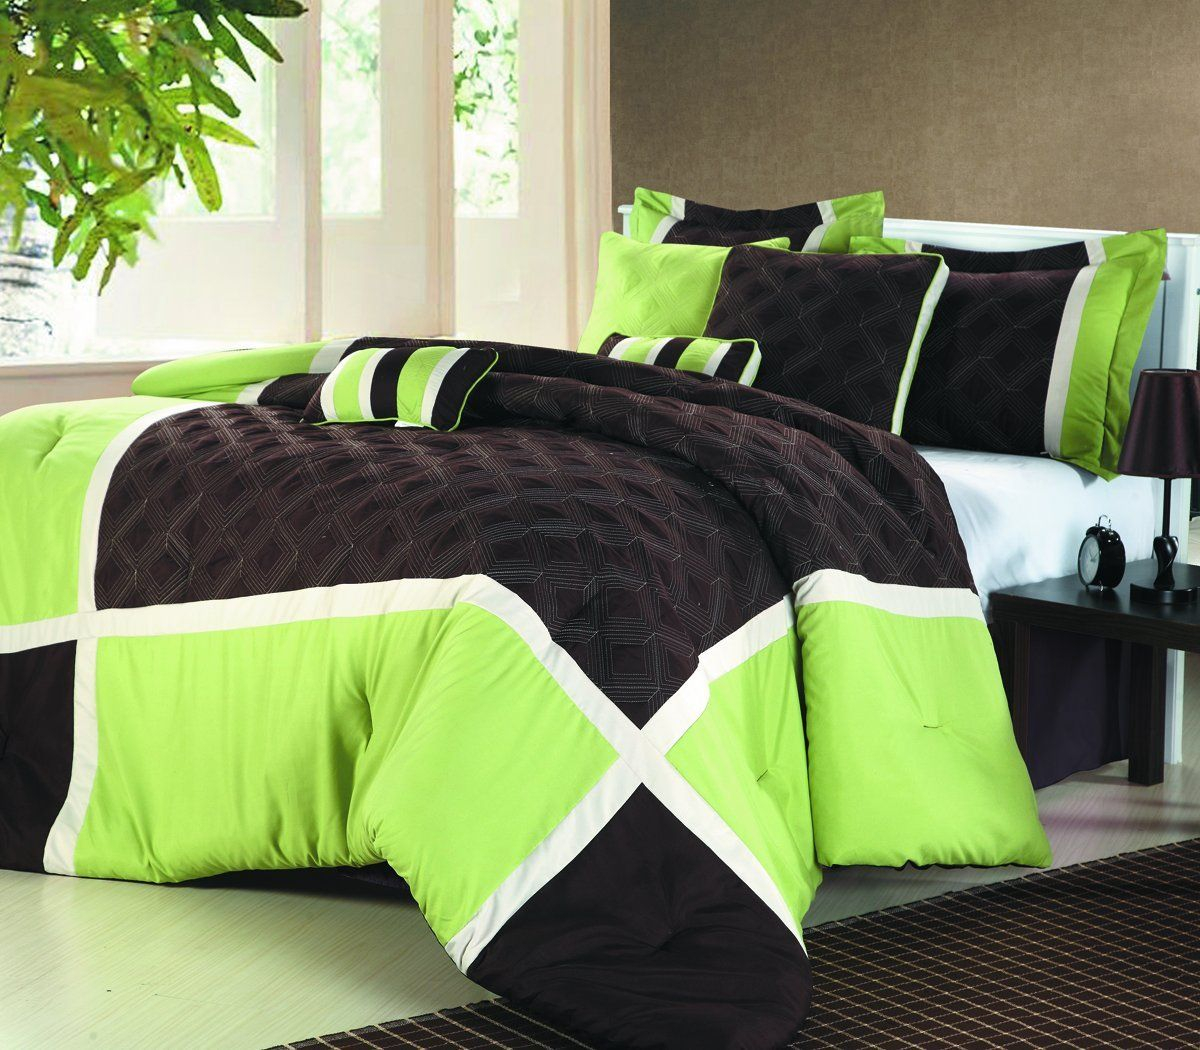 Lime Green And Black Bedding Sweetest Slumber 2018 My New throughout dimensions 1200 X 1050